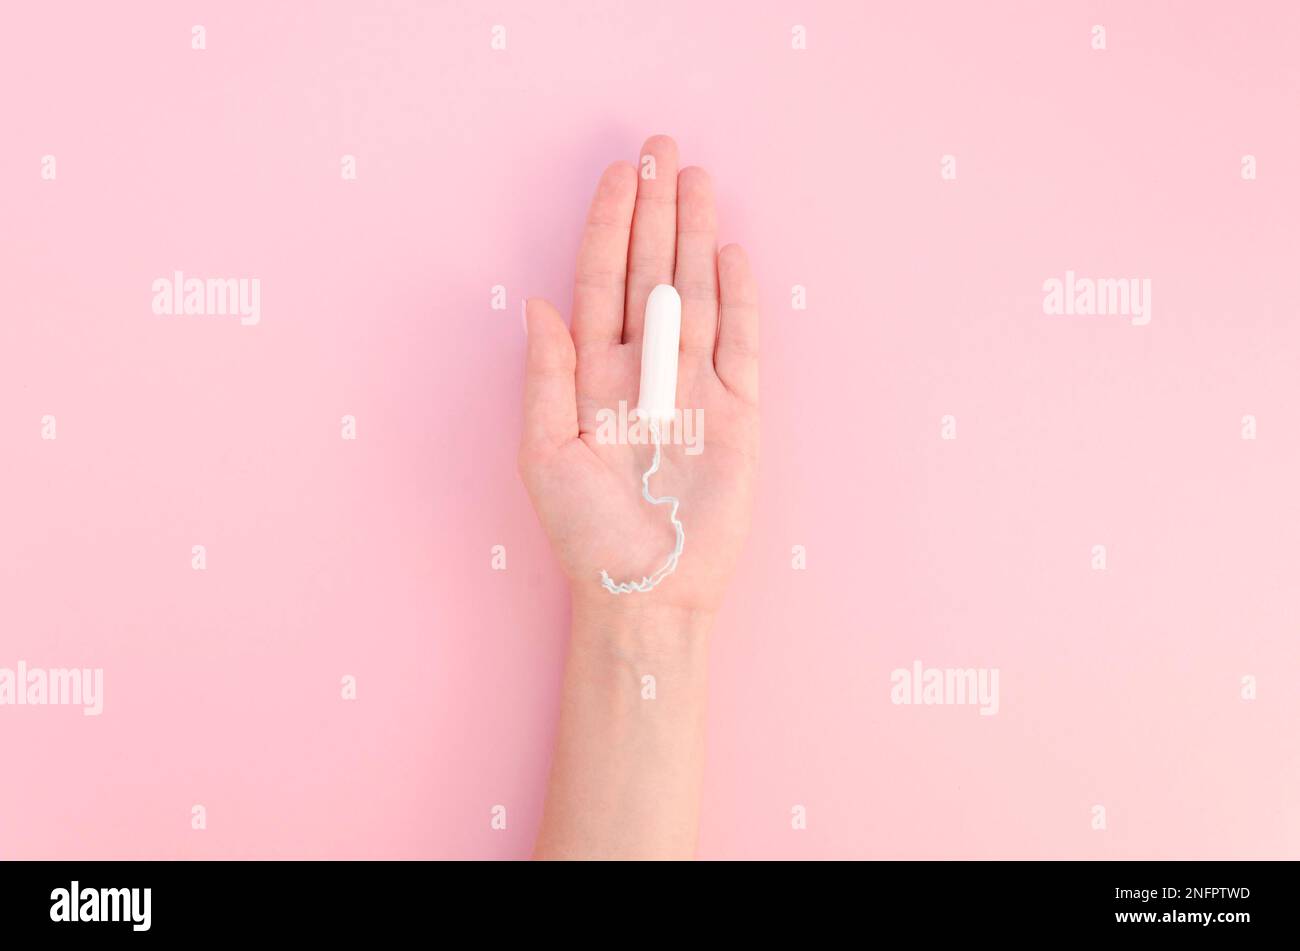 hand holding tampon pink background Stock Photo